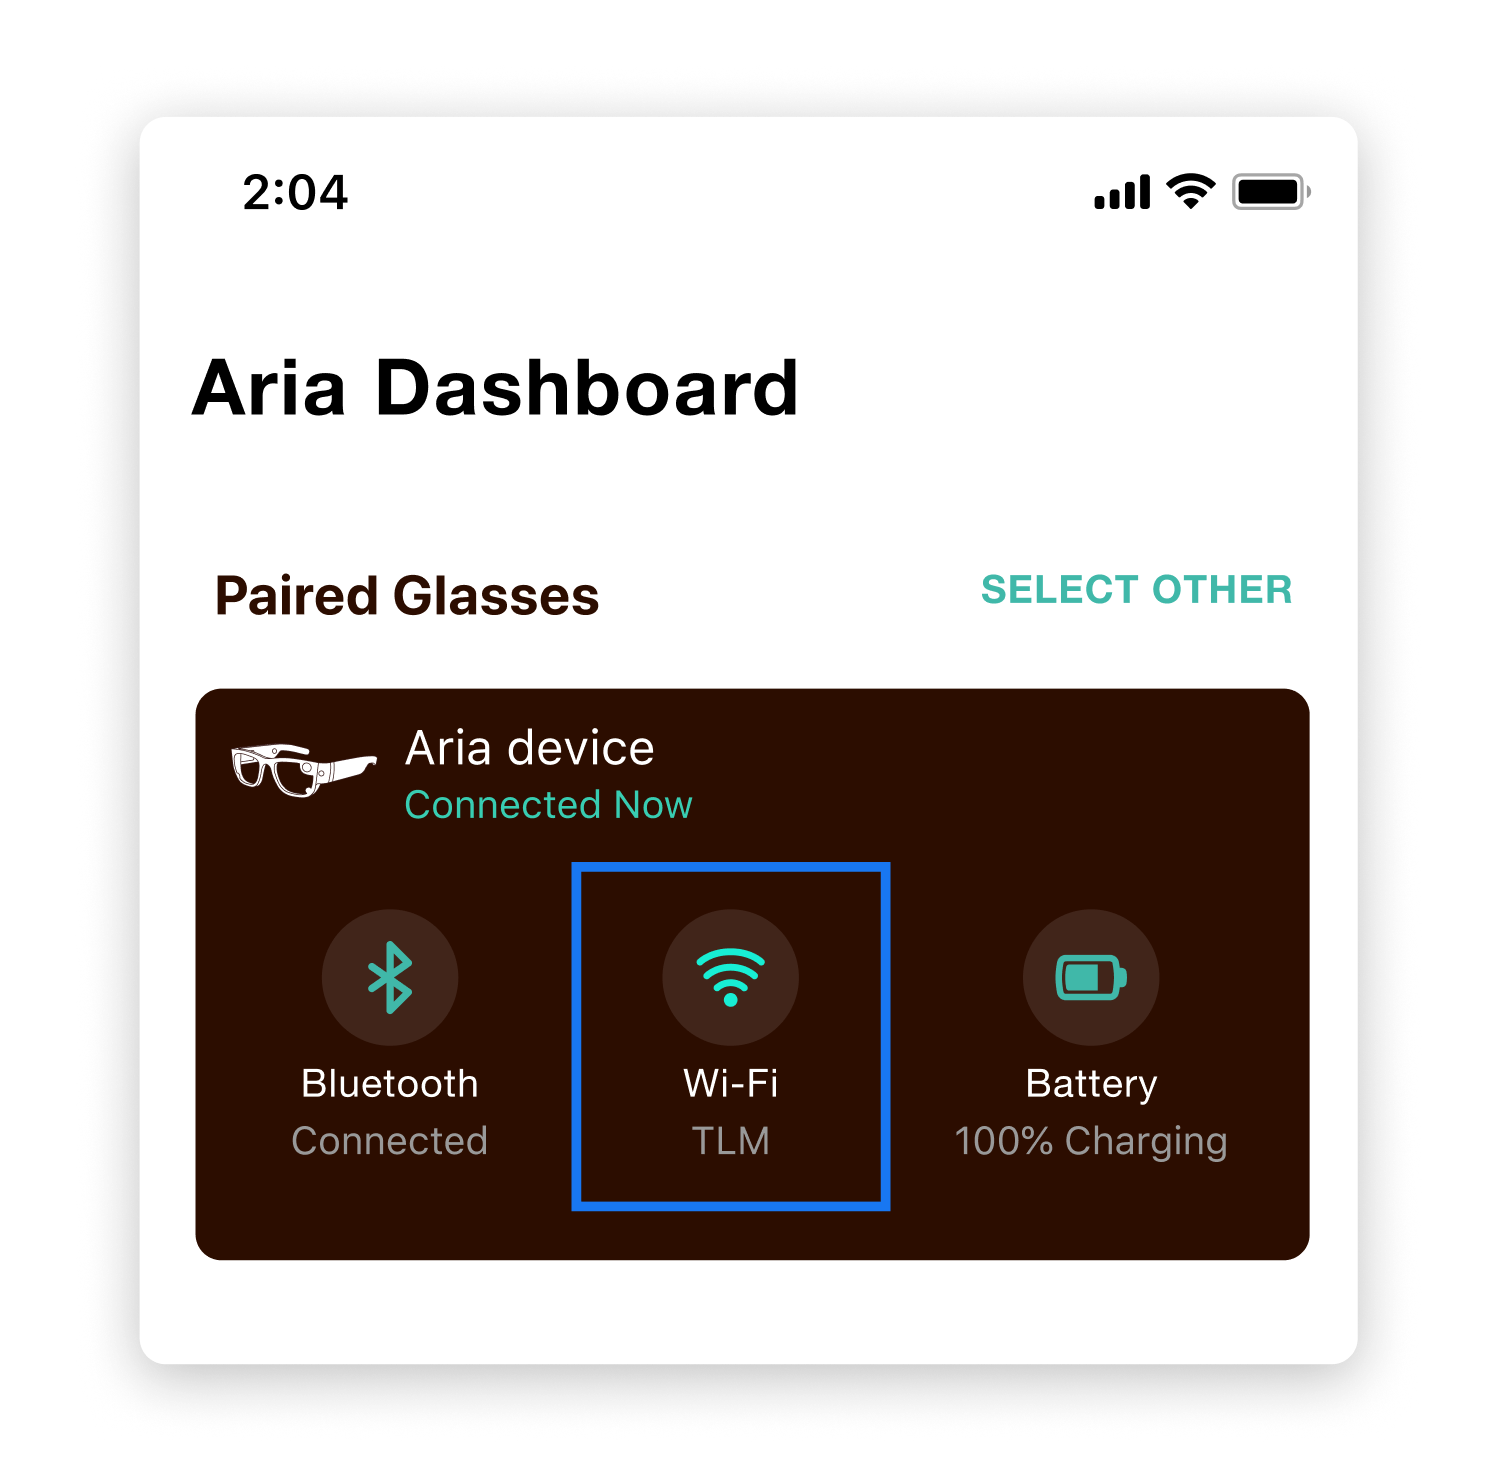 Project Aria Mobile Companion App Dashboard, showing where the Wi-Fi setting is